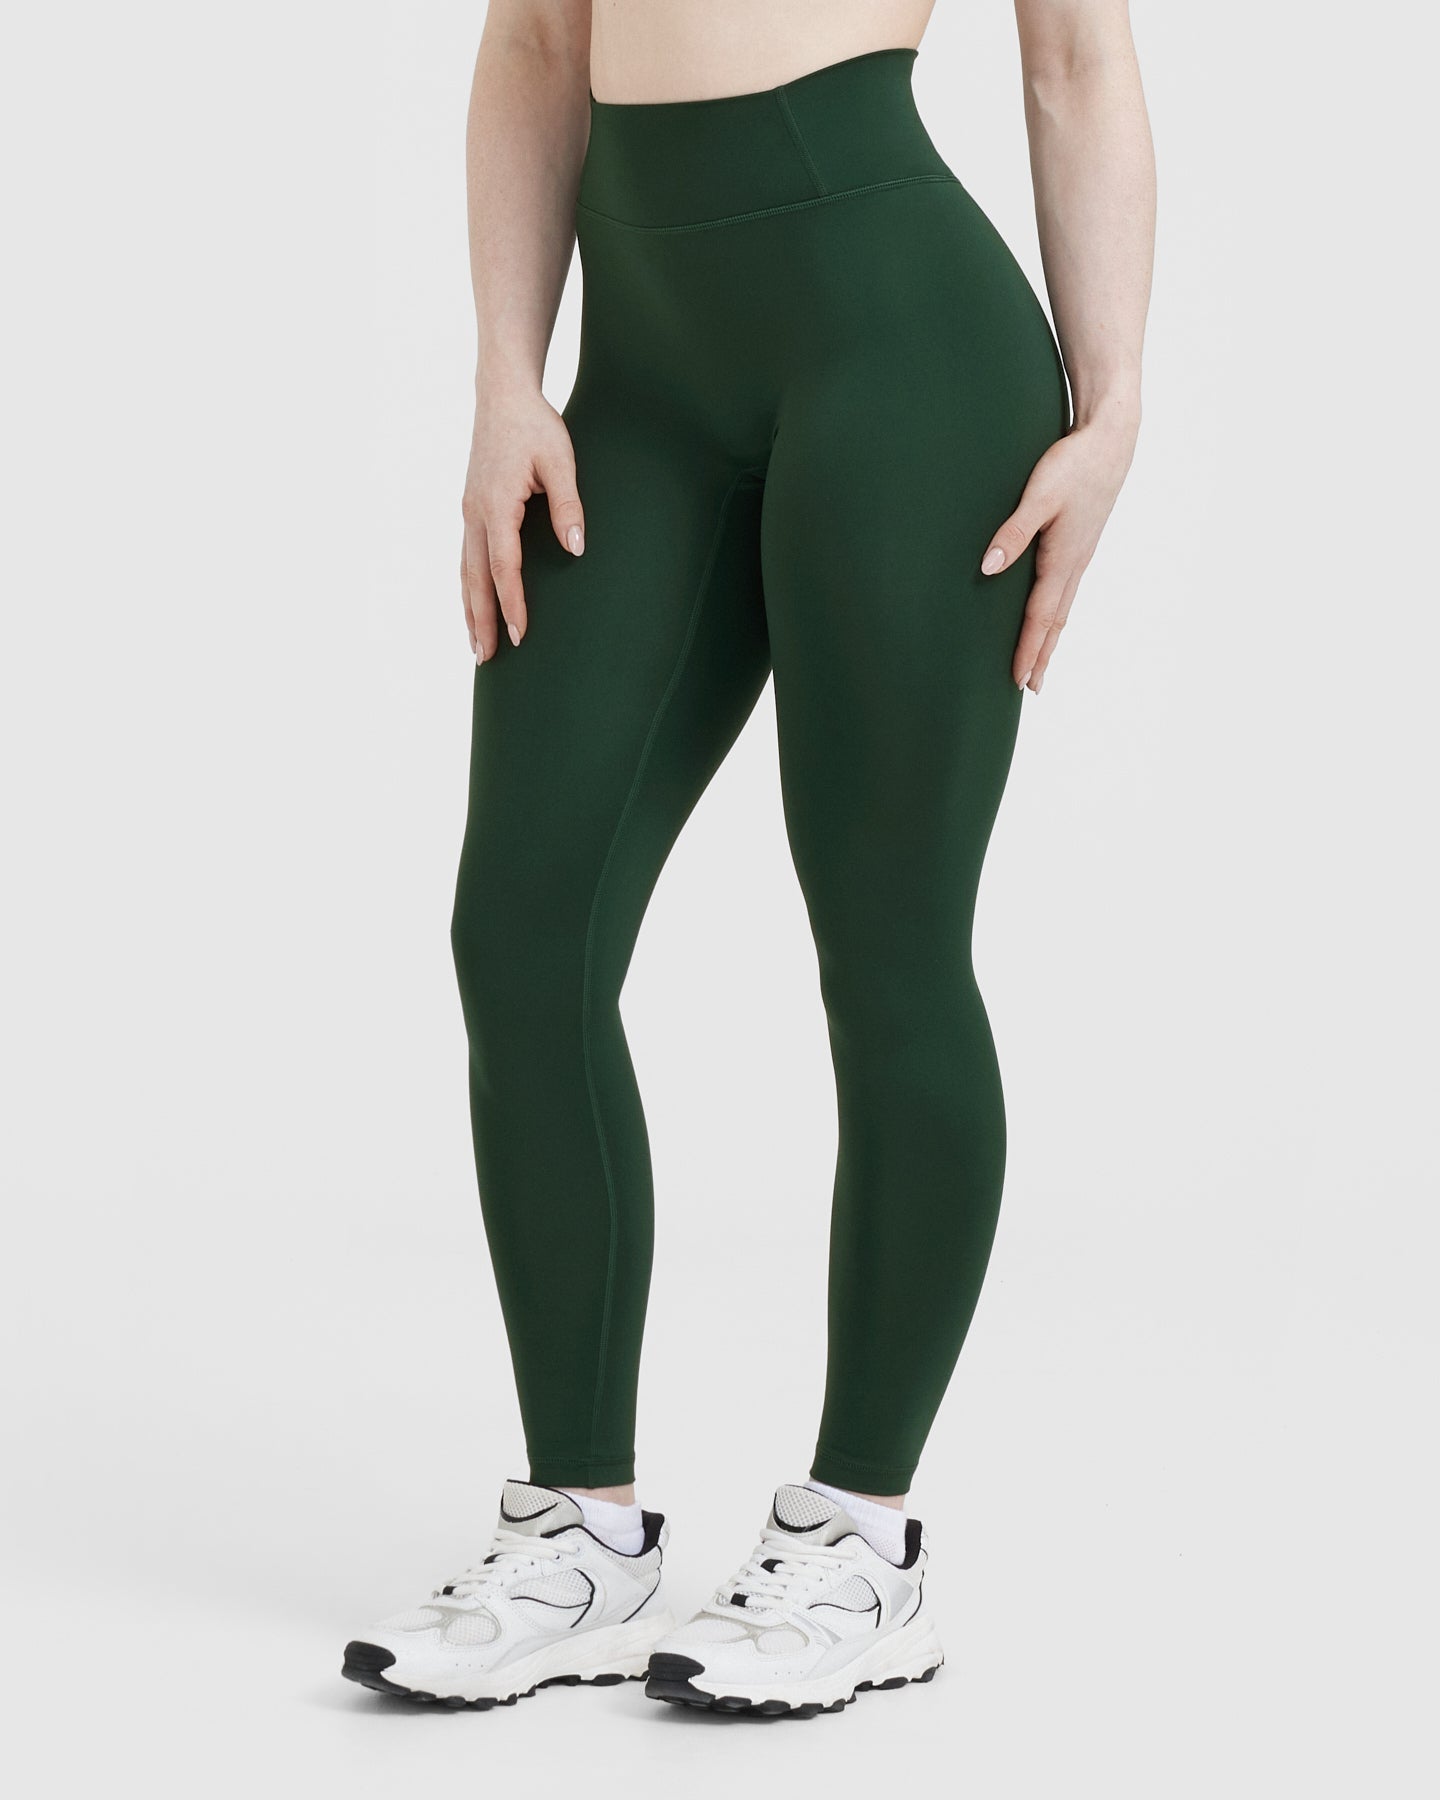 Get Sporty with Prisma's Parrot Green Ankle Leggings